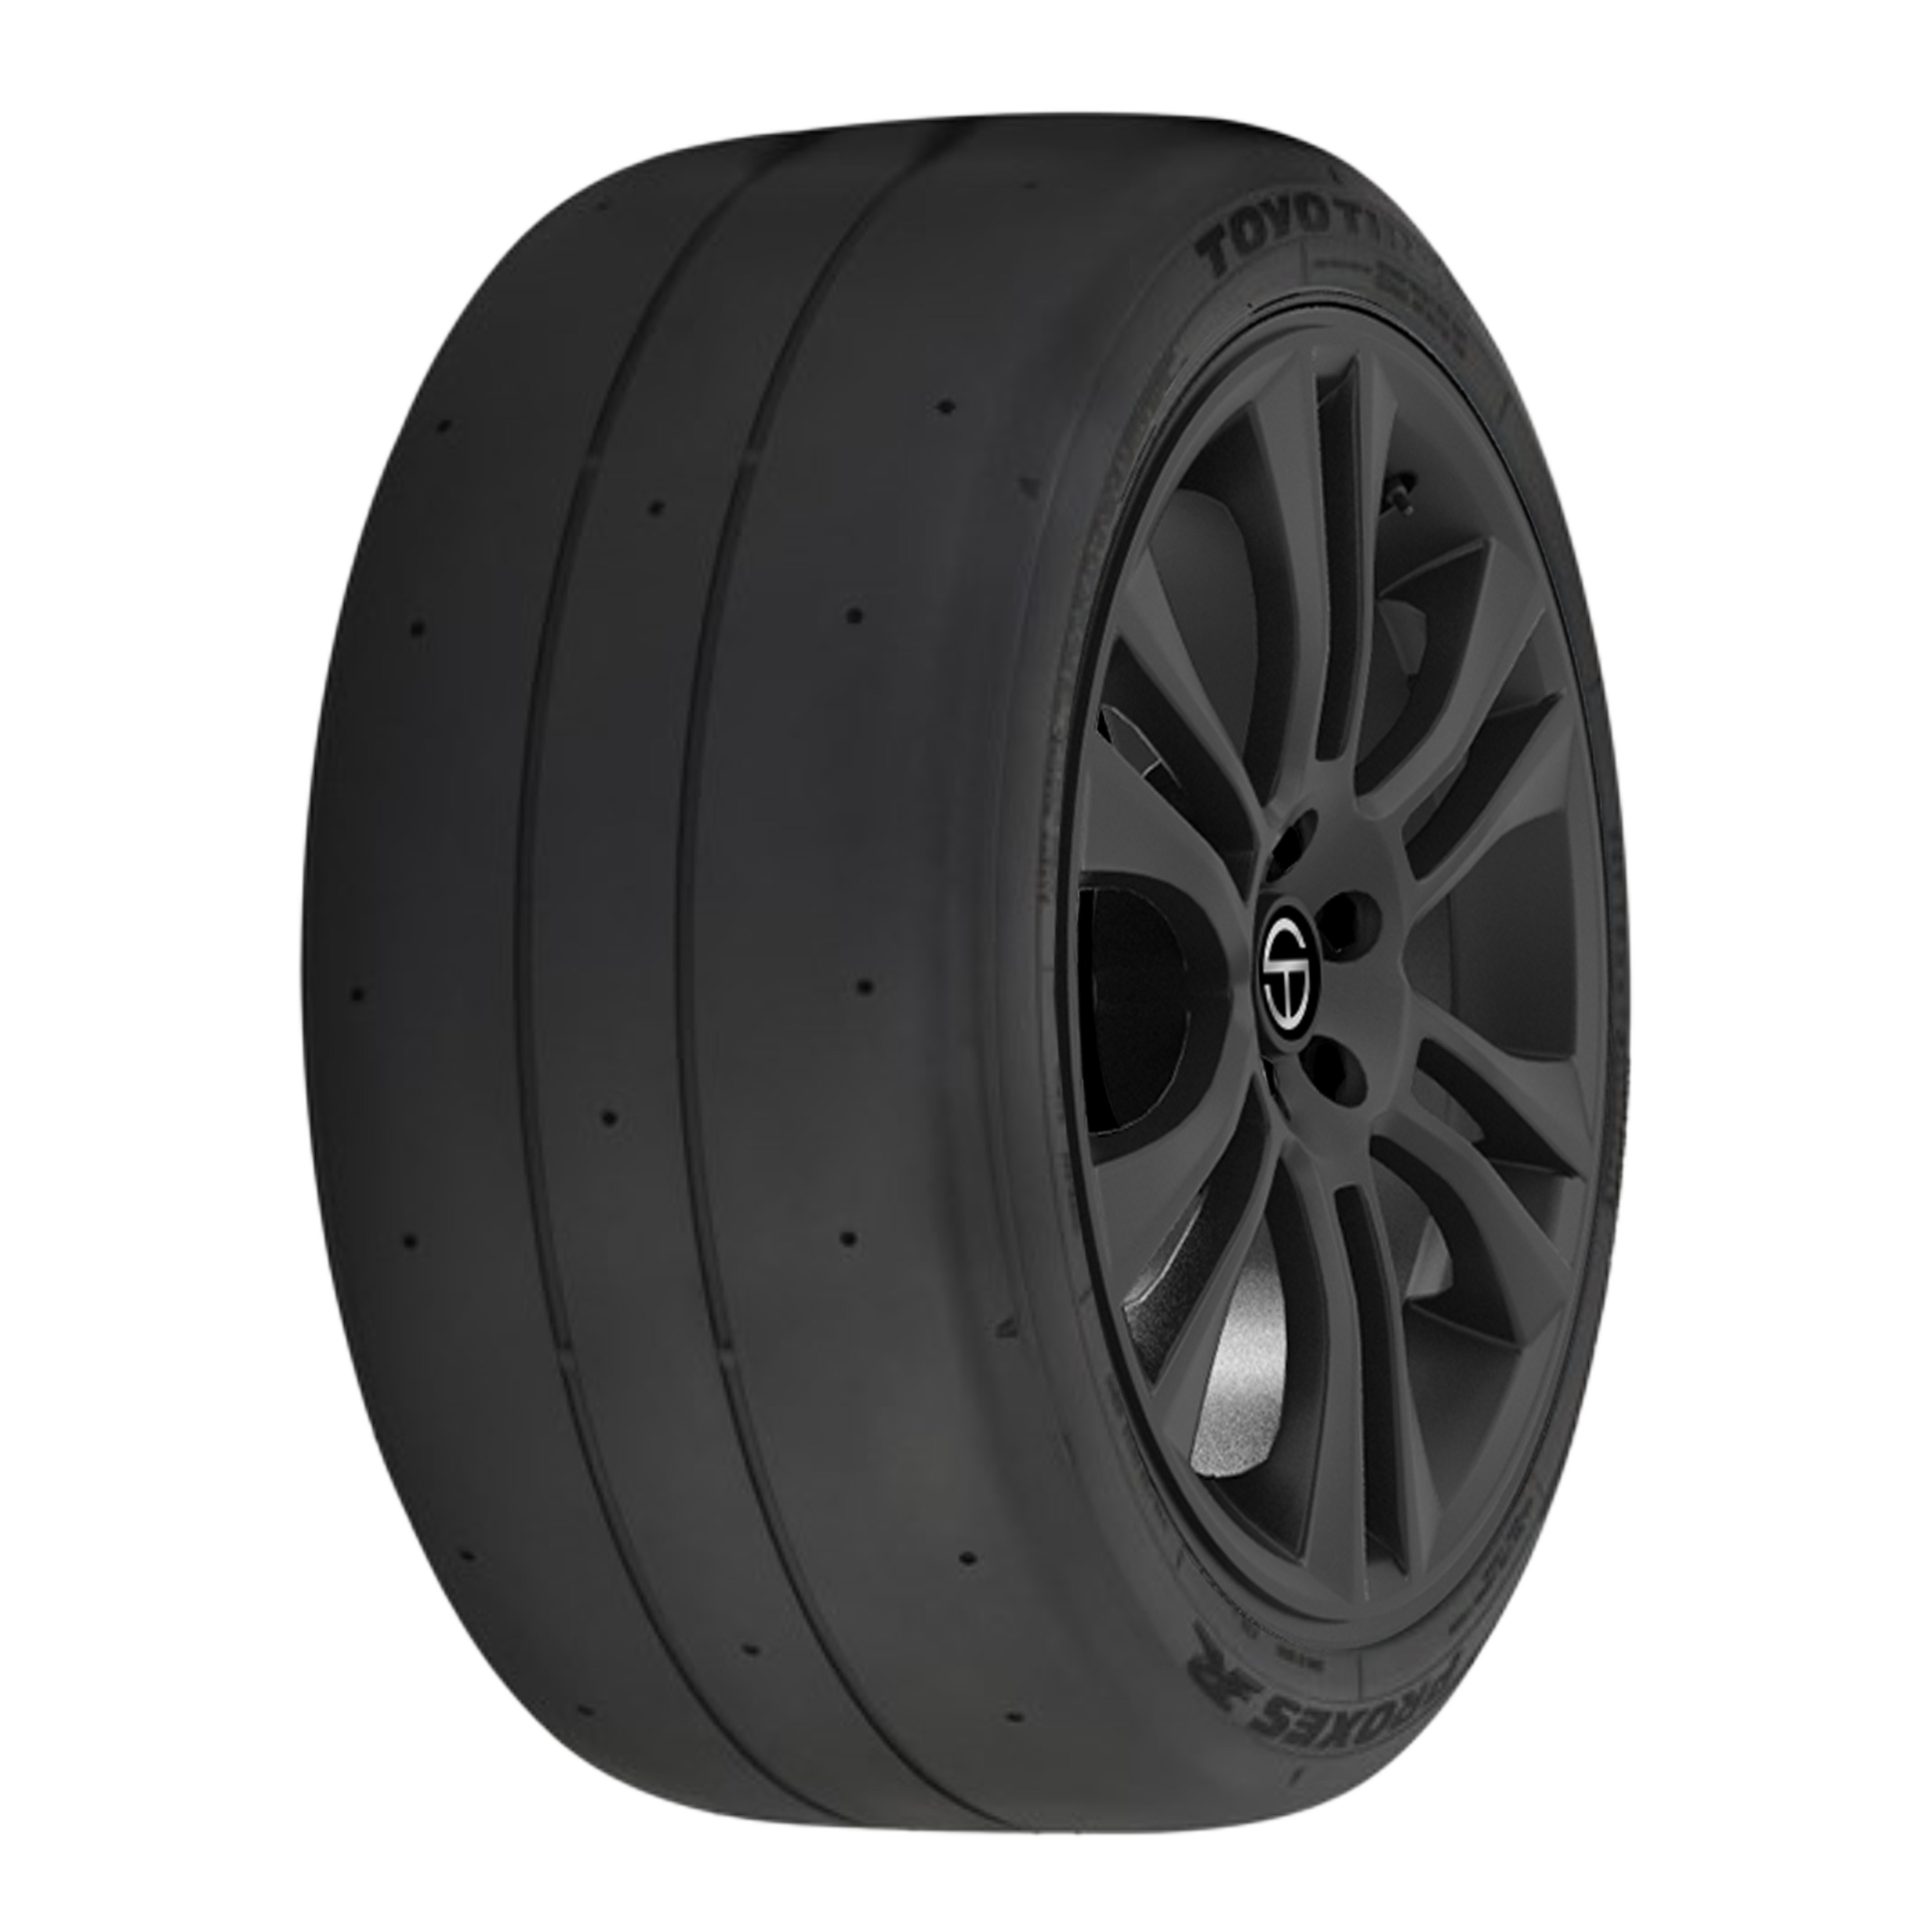 Buy Toyo Proxes R Tires Online | SimpleTire